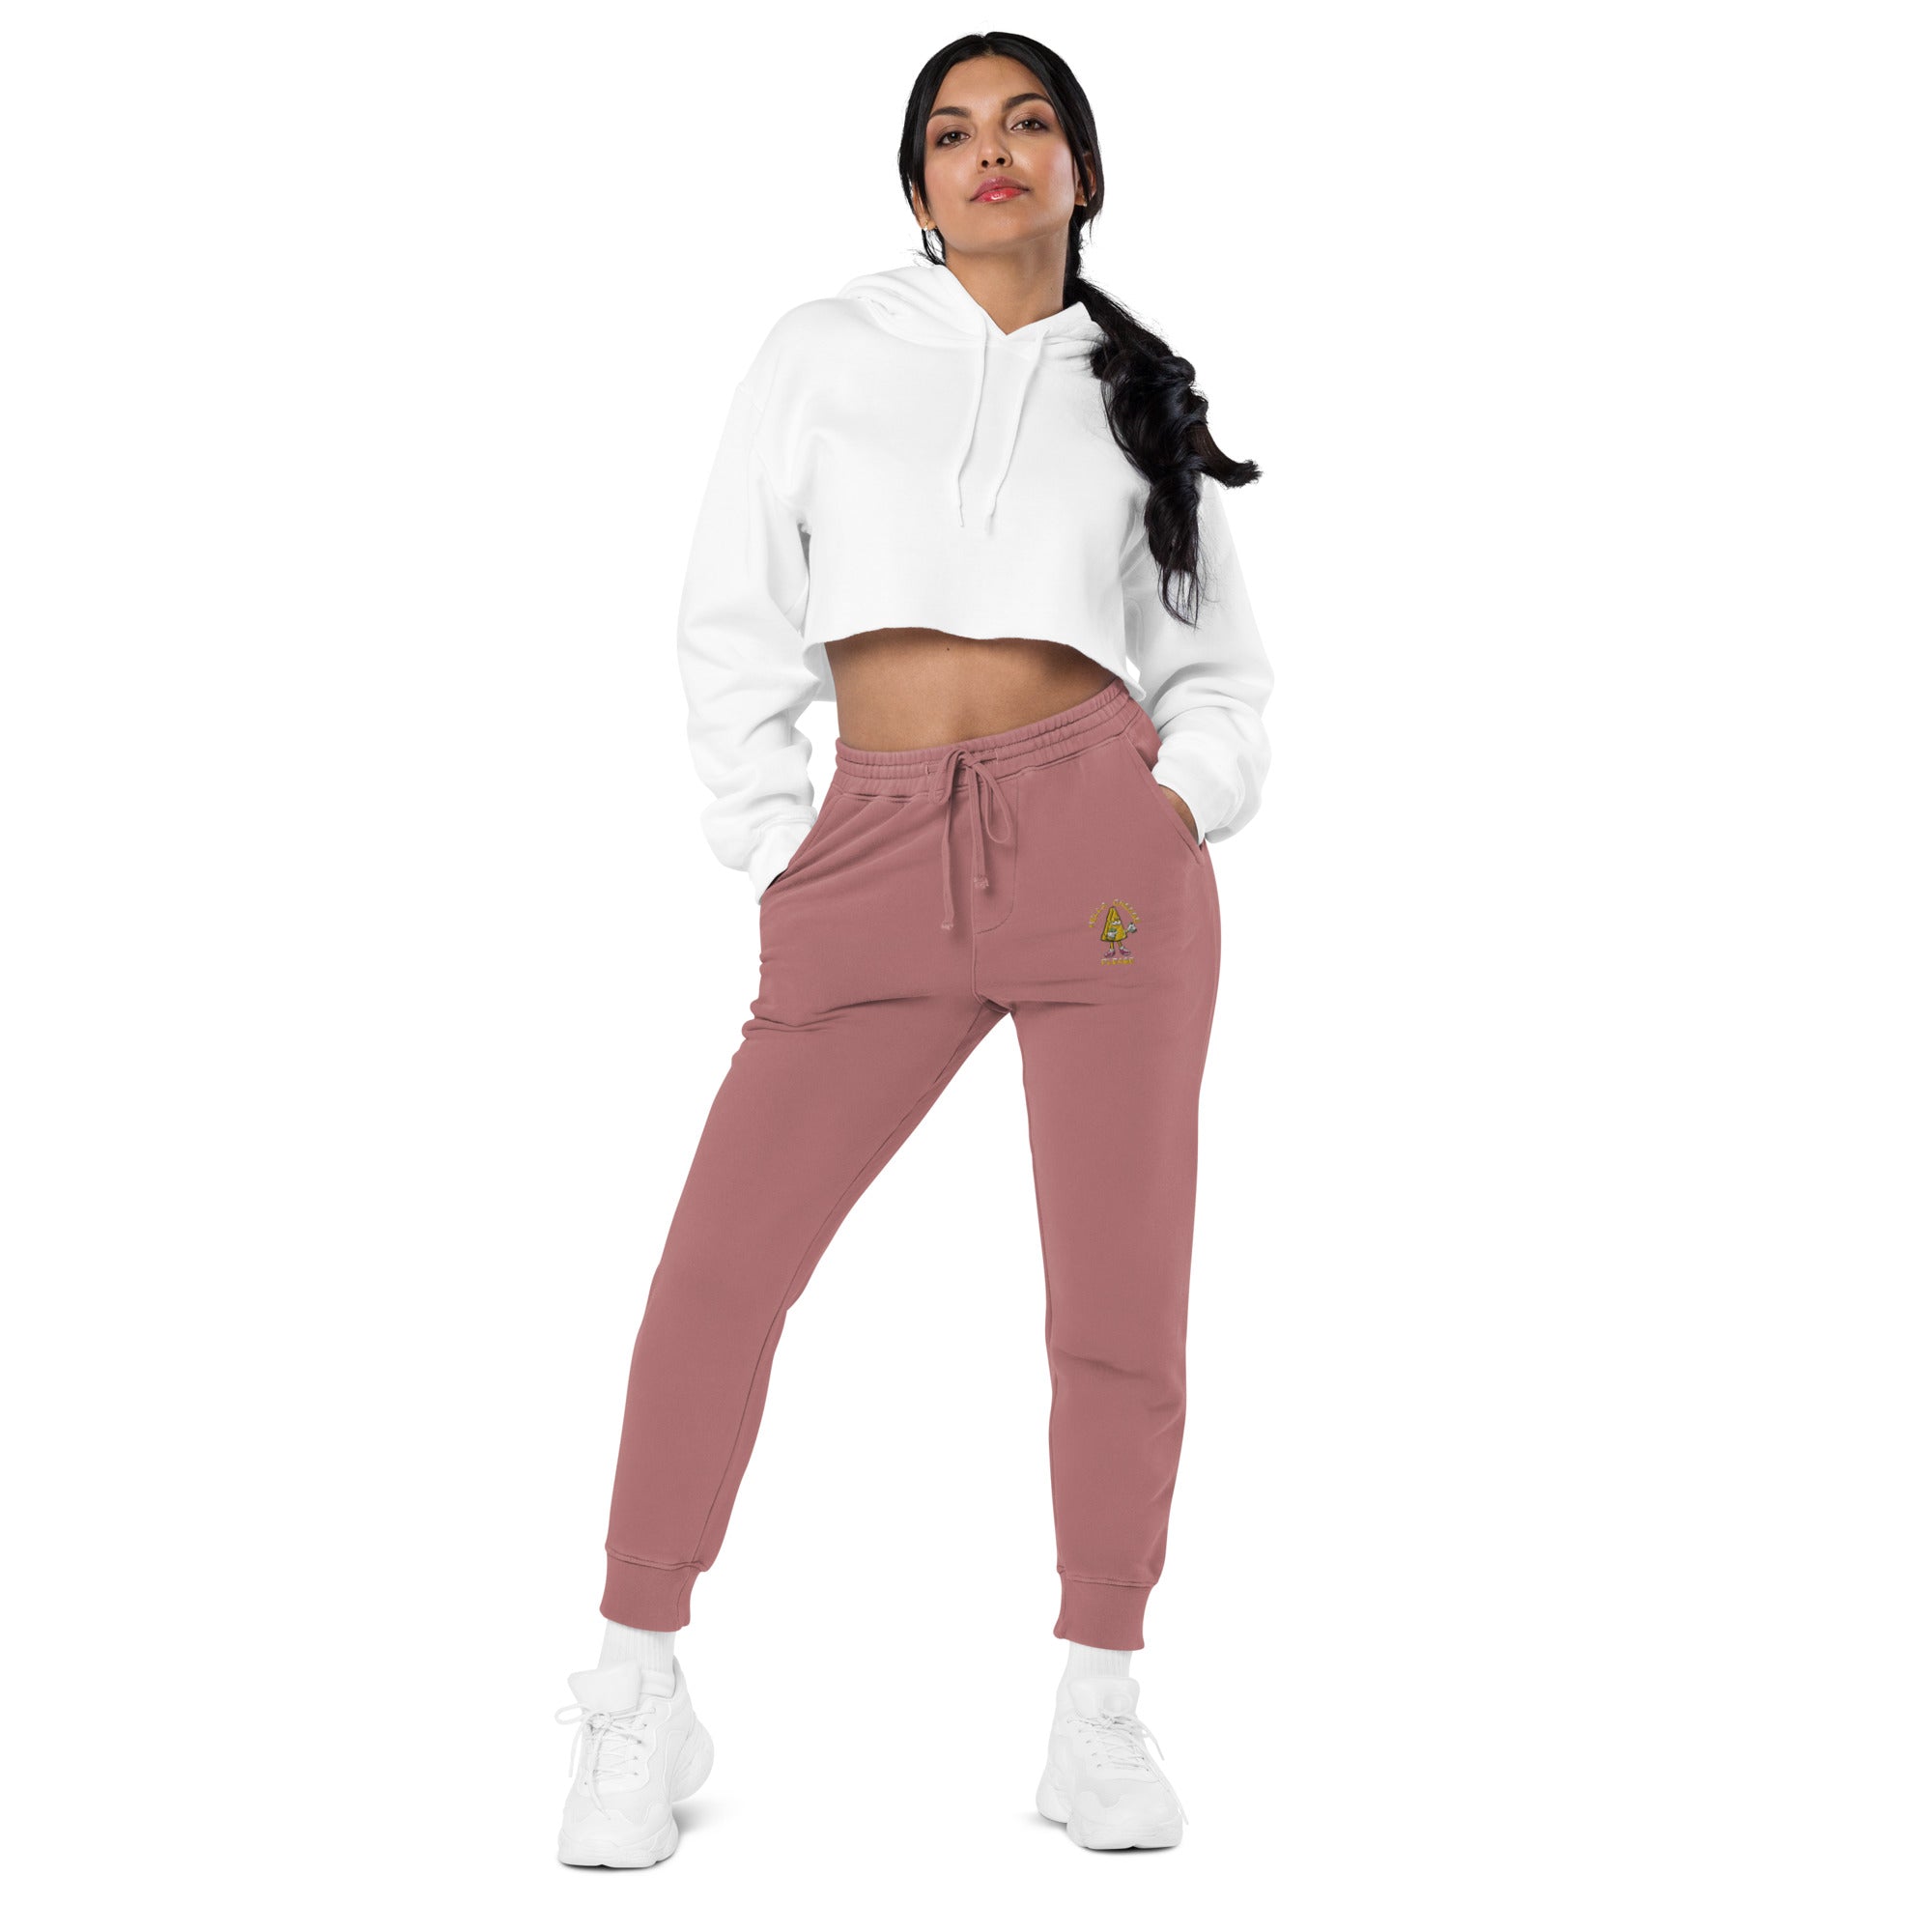 Hella Cheese Please - HCP Unisex pigment dyed sweatpants